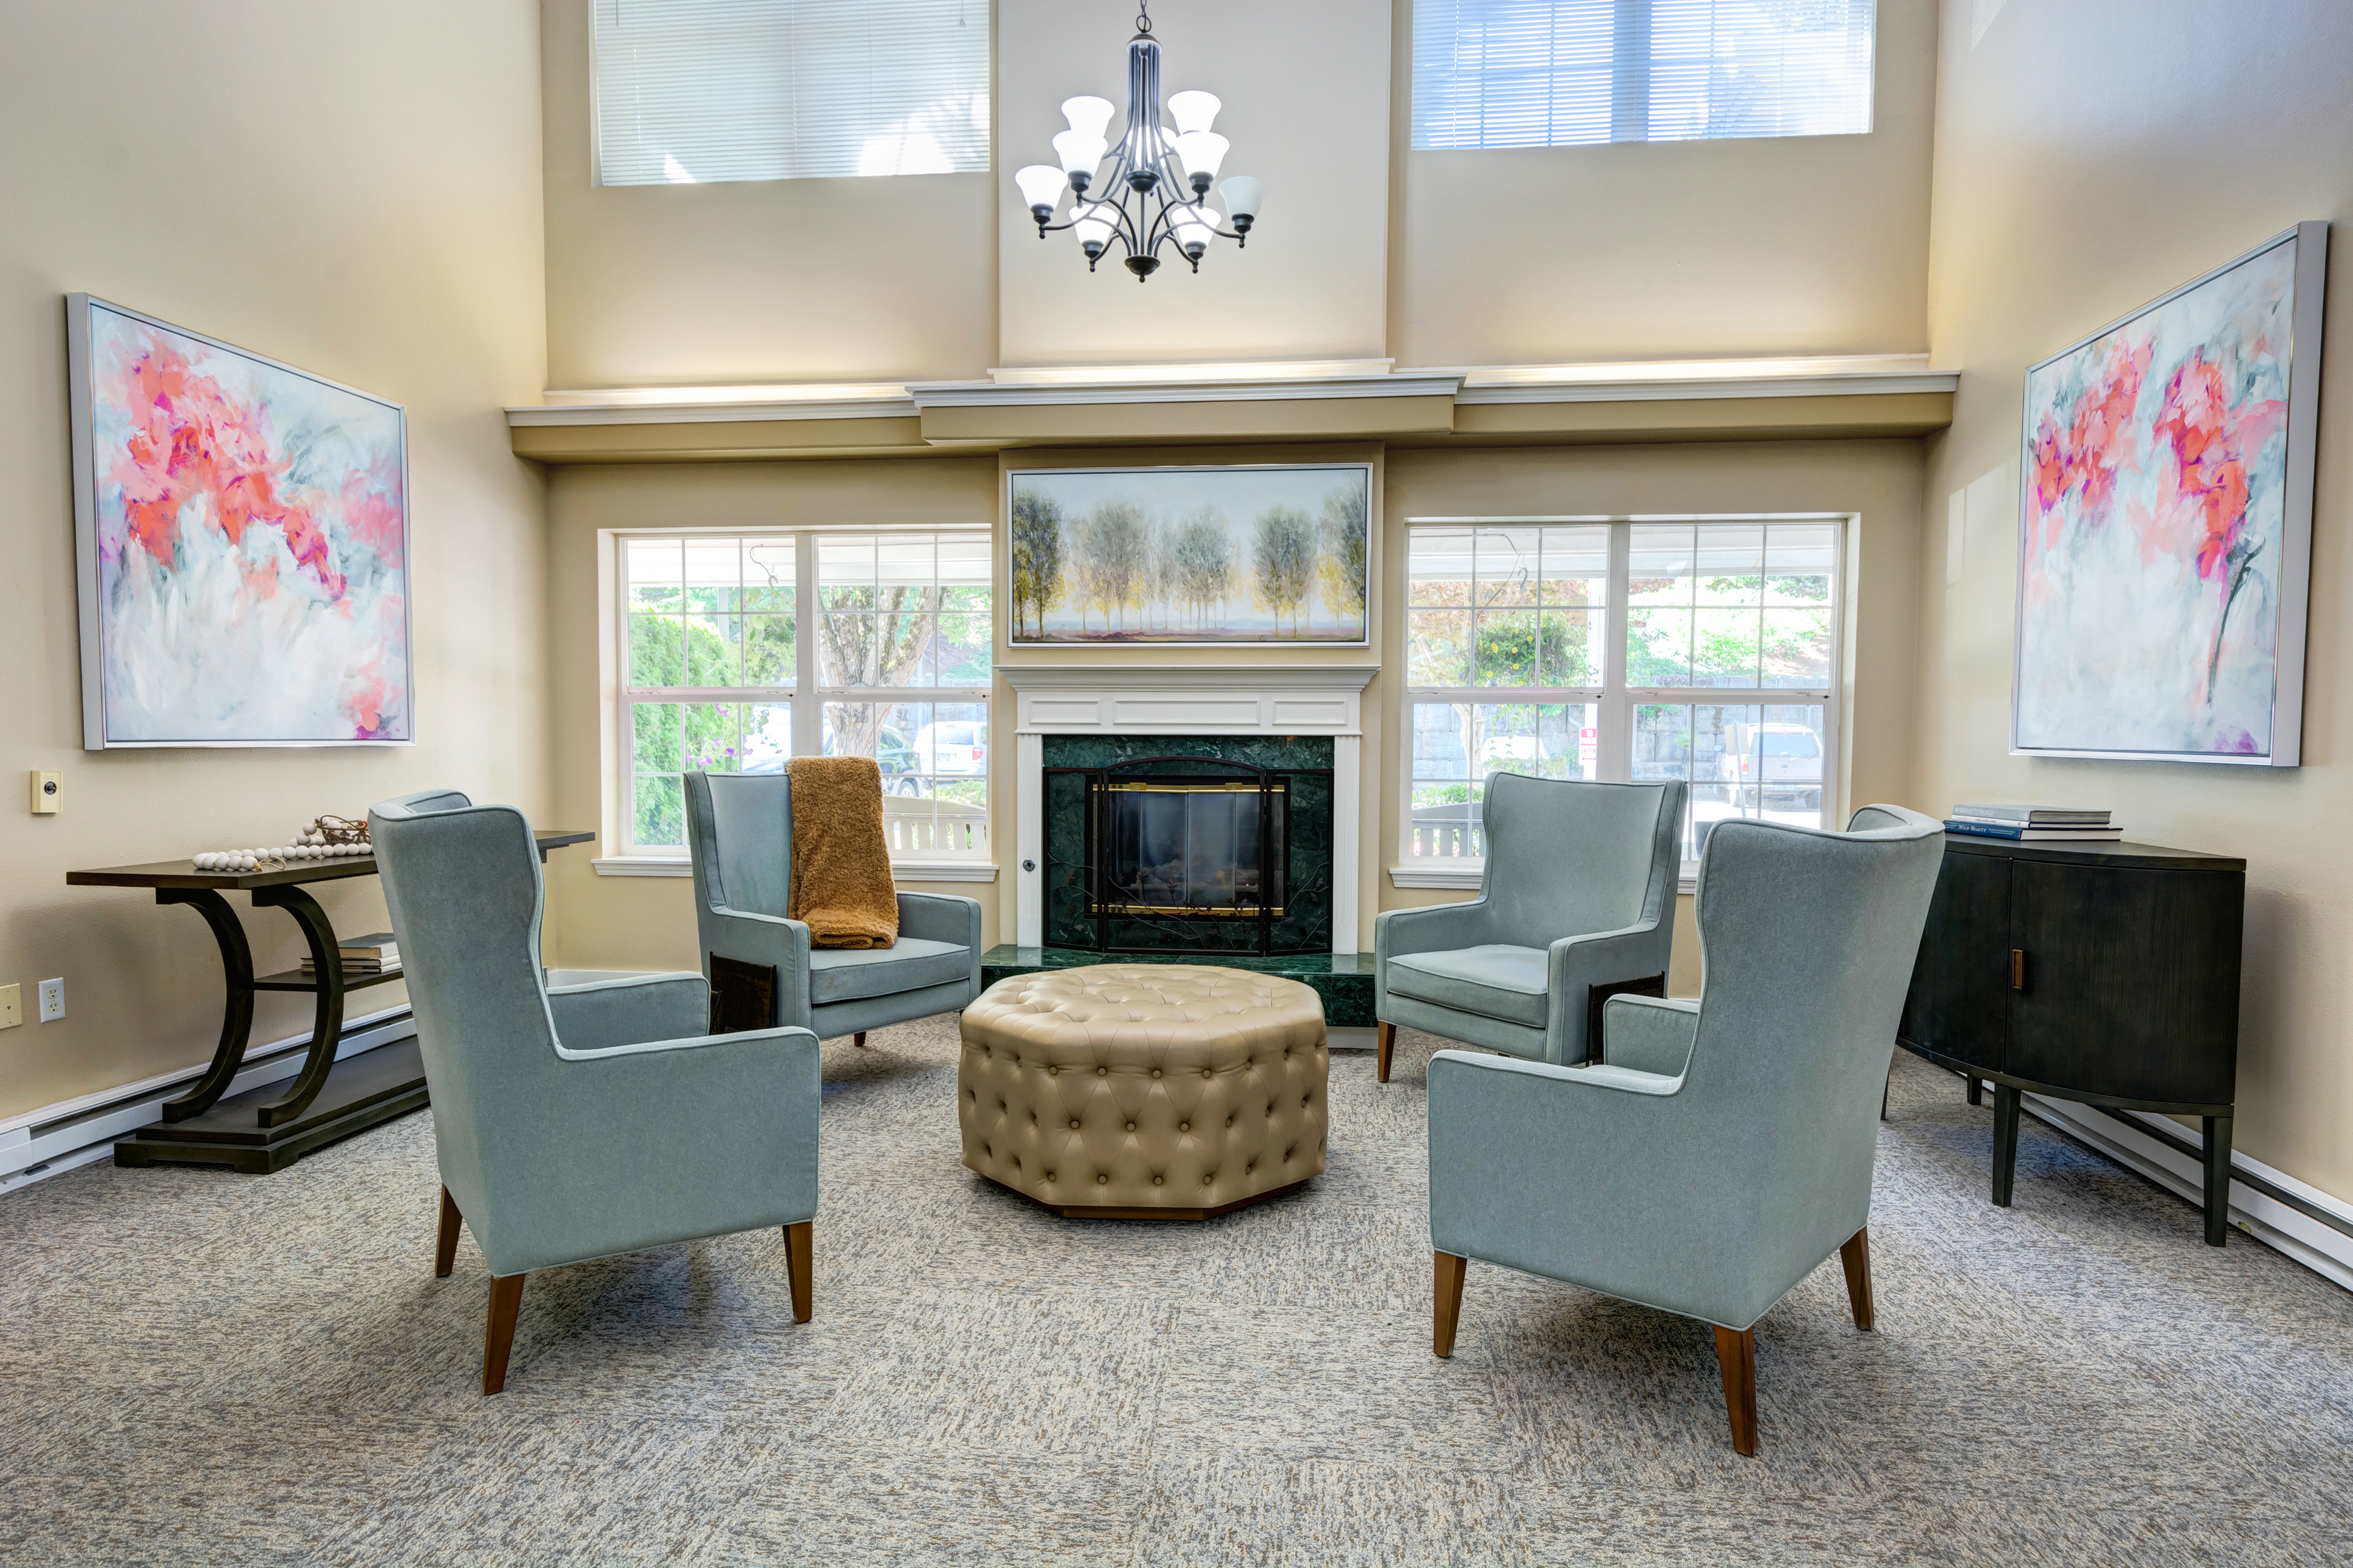 Redwood Heights Assisted Living image